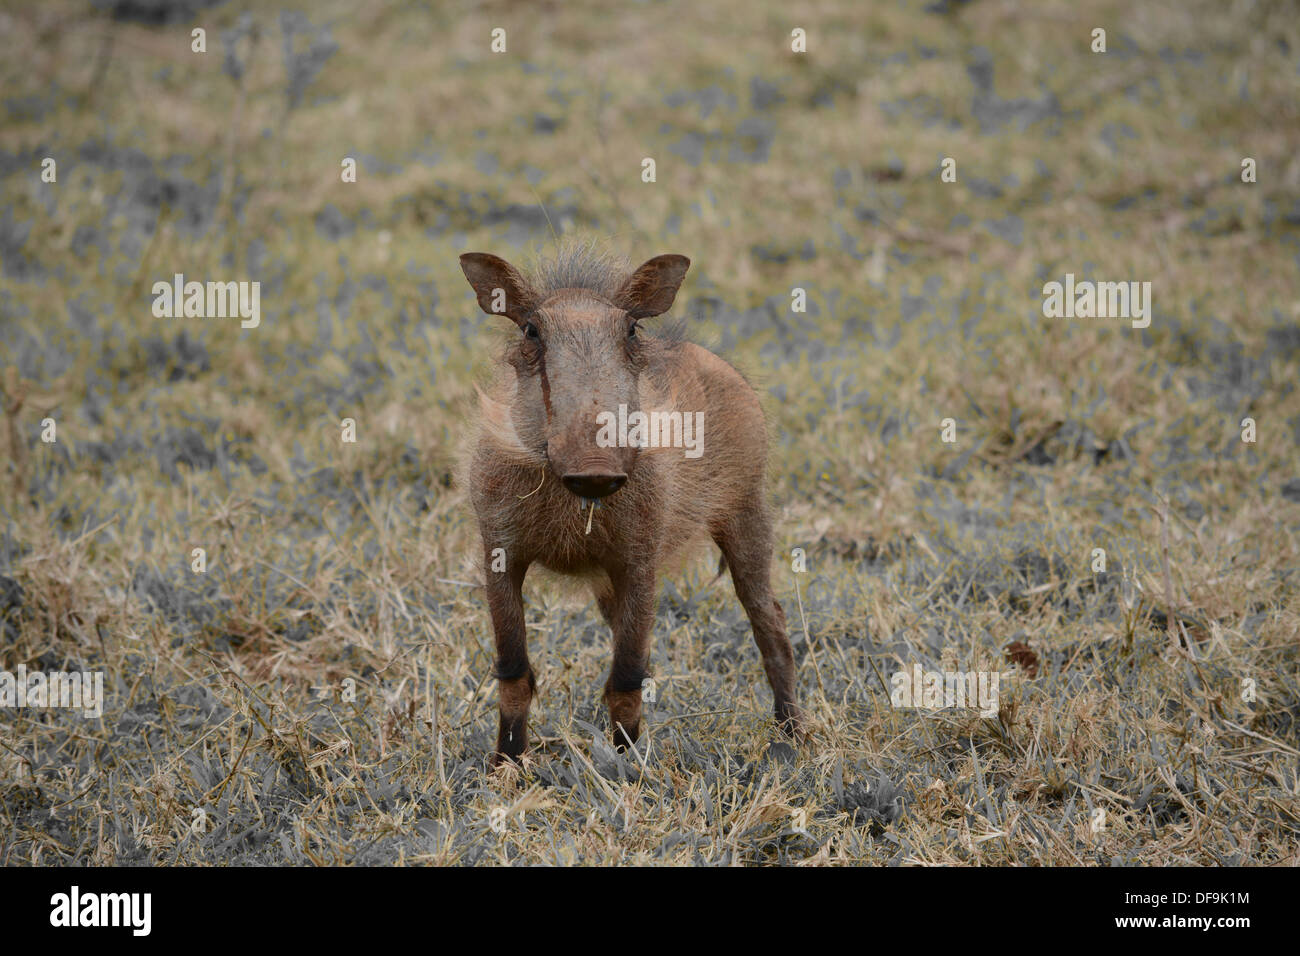 Bush Pig looking out to the distance. Stock Photo